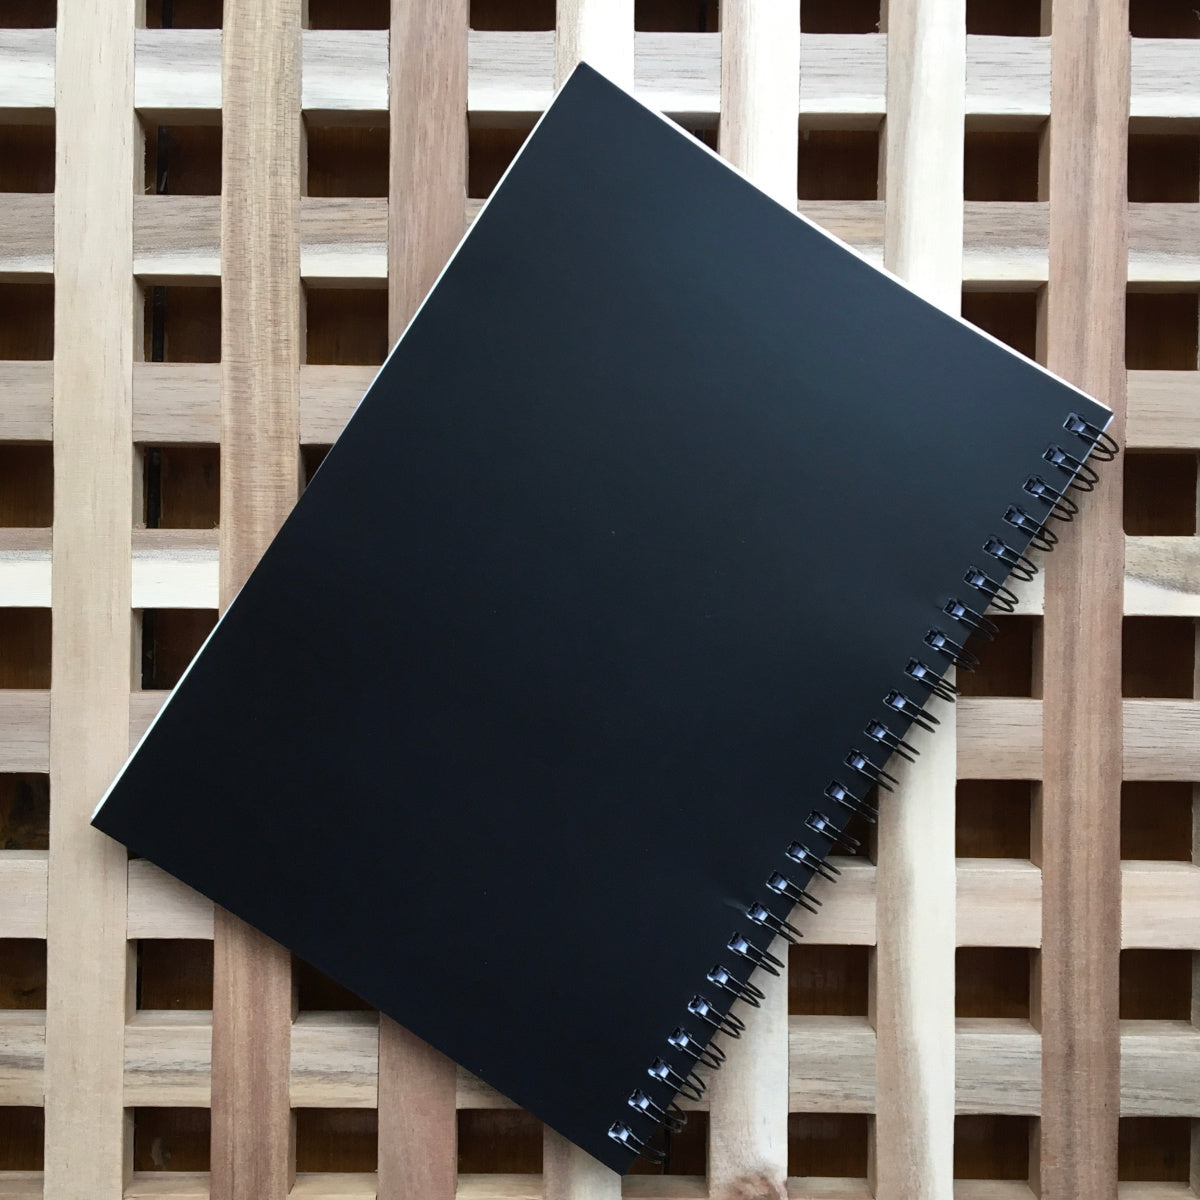 Black spiral notebook lying flat on a wooden surface showing the plain black back cover of the notebook